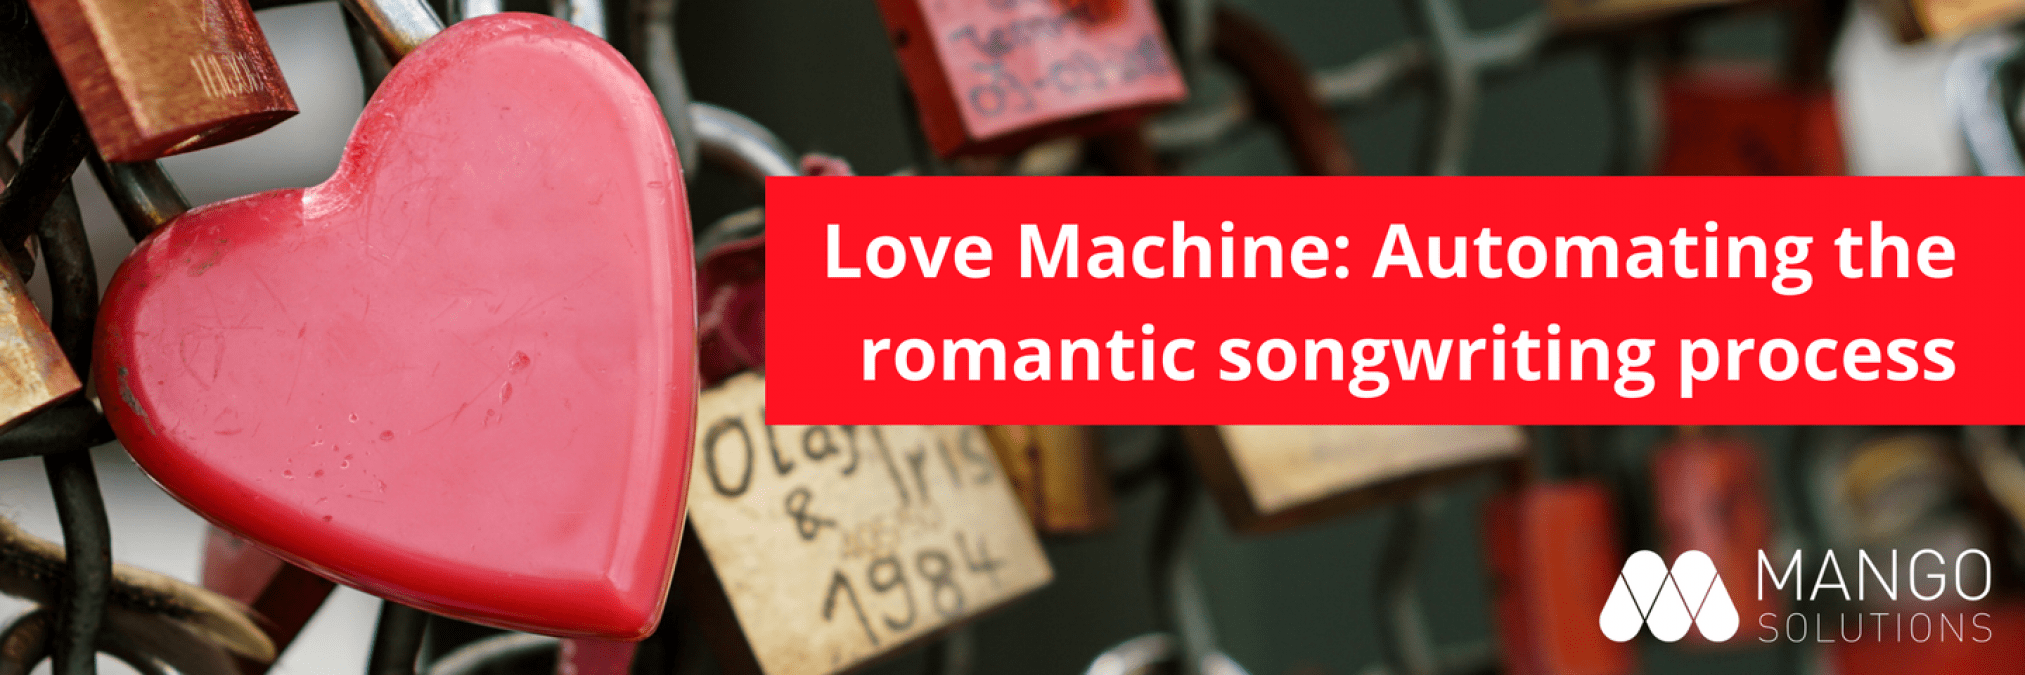 Love Machine: Automating the romantic songwriting process